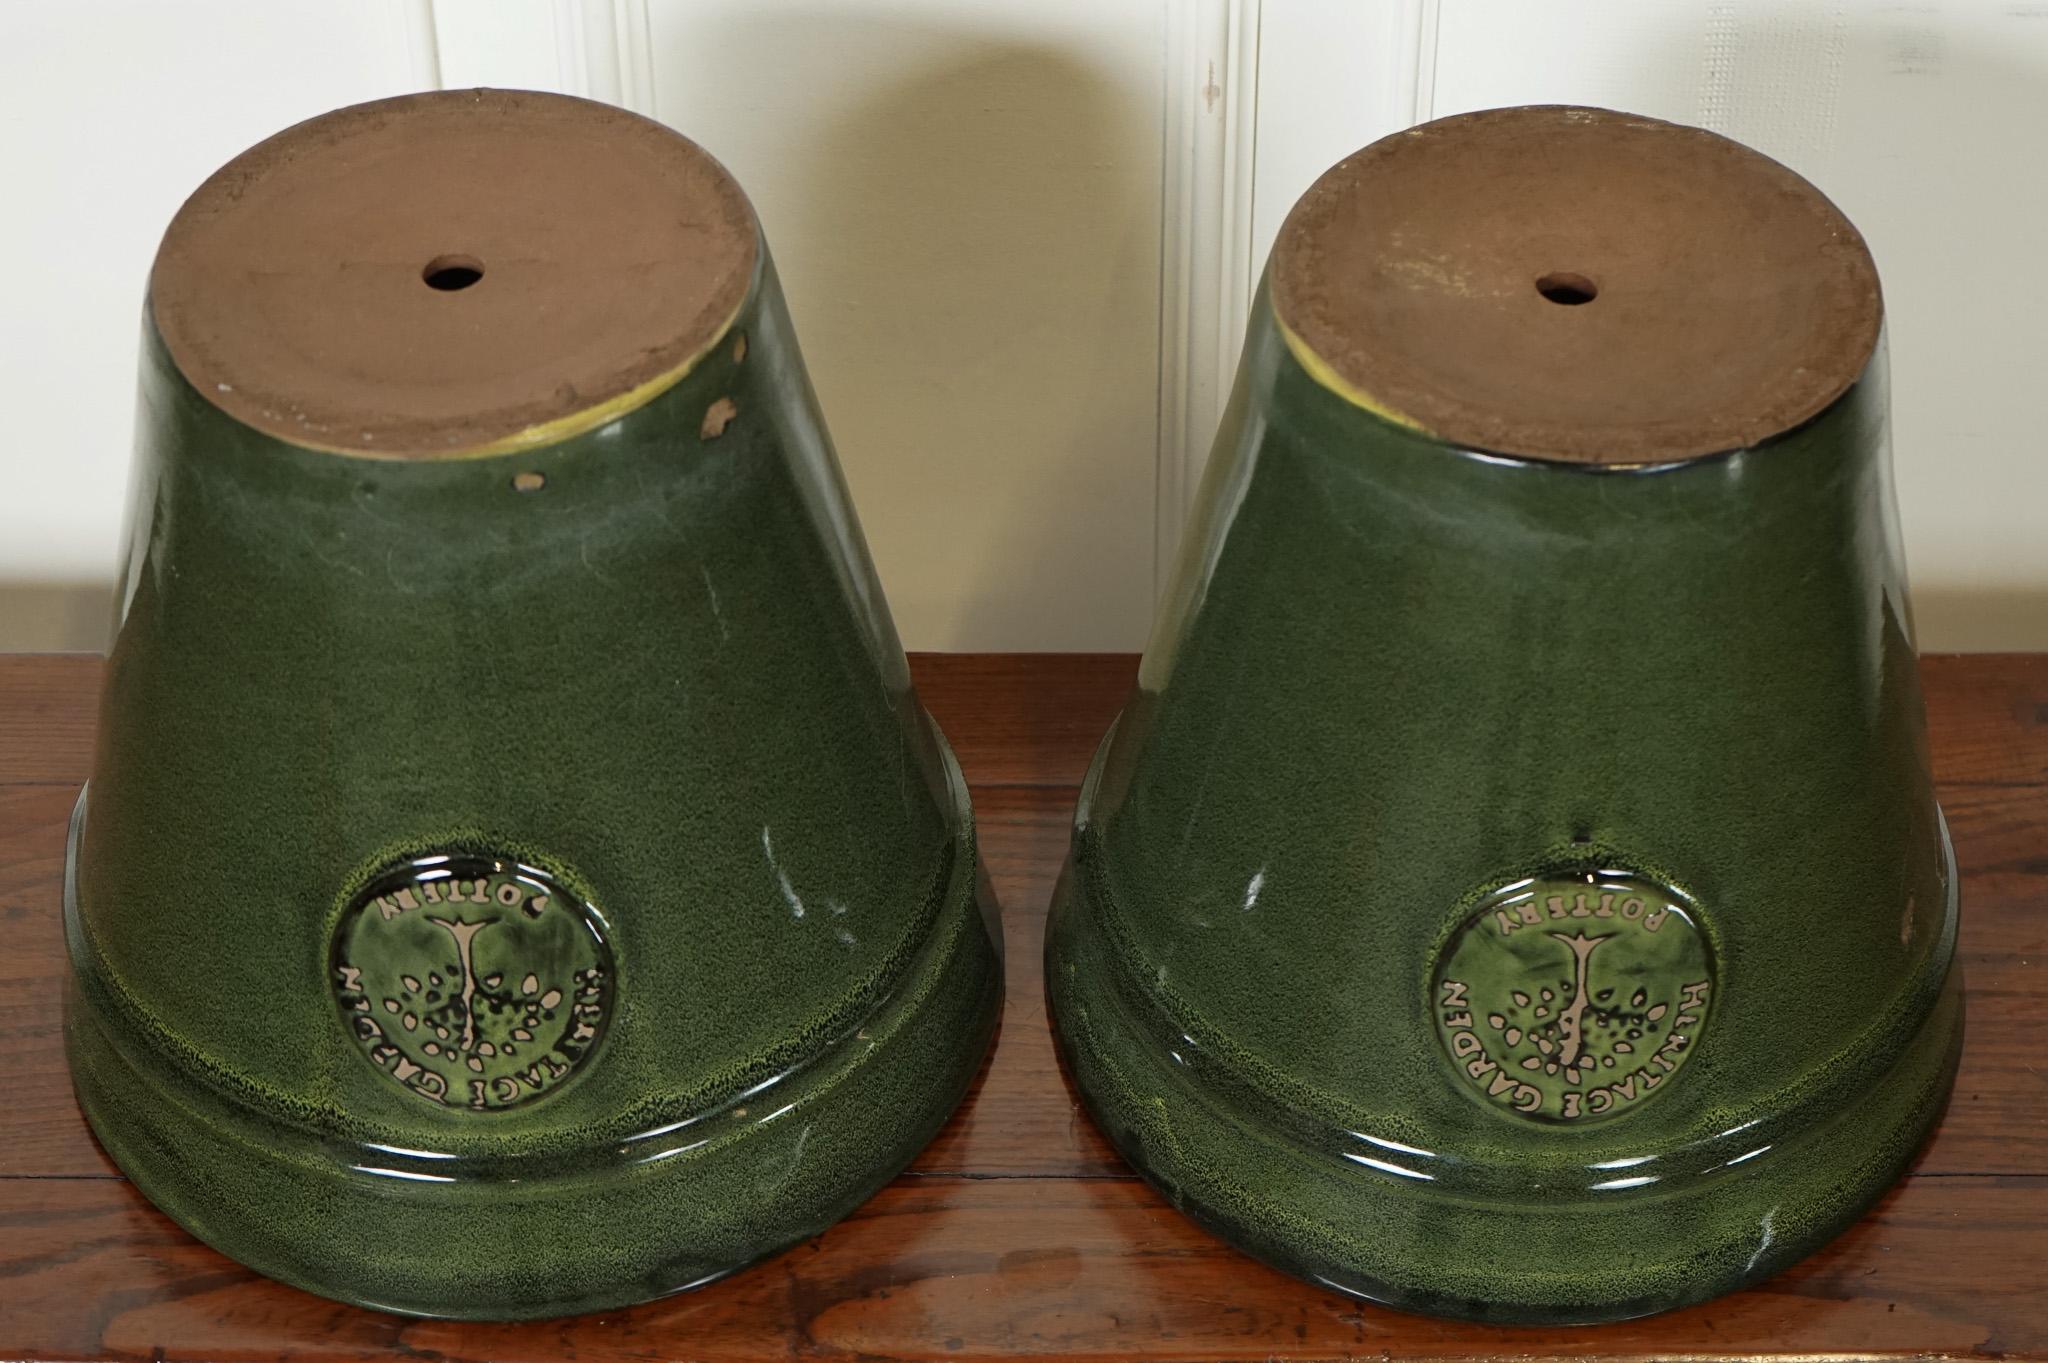 A PAIR OF GREEN EDWARDIAN STYLE FLOWER PLANT POTS BY HERITAGE GARDEN j1 For Sale 6